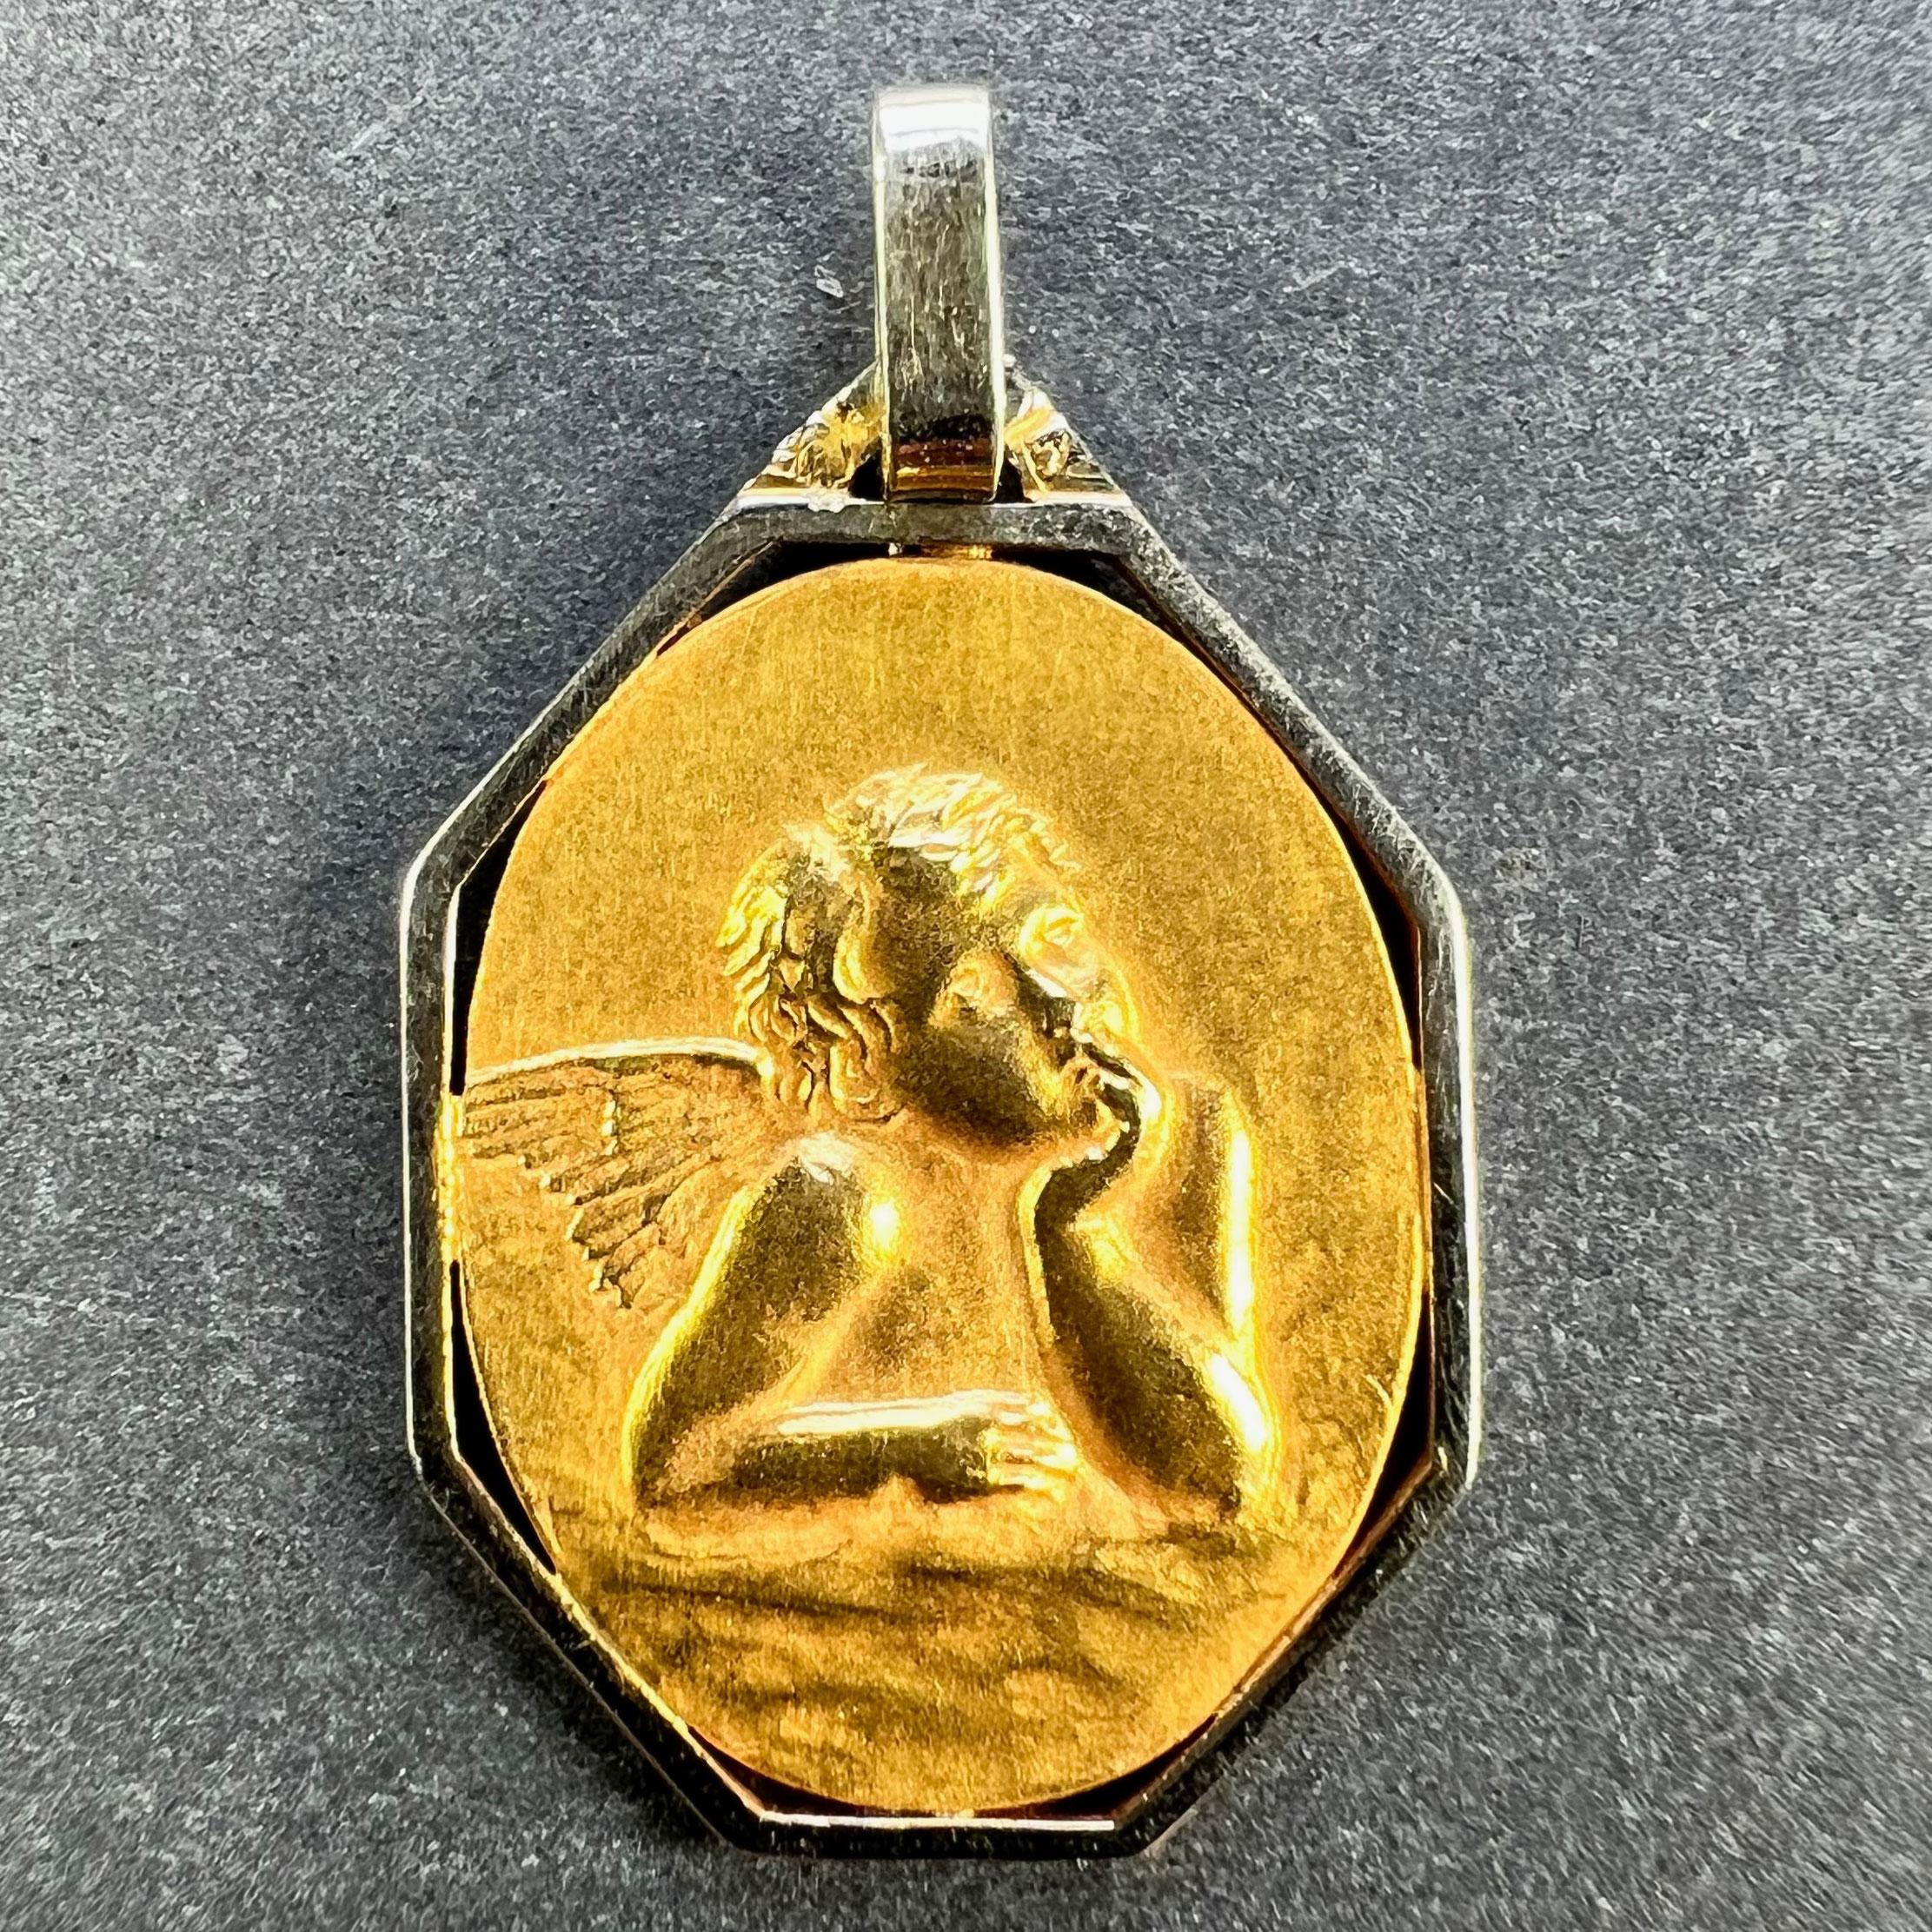 A French 18 karat (18K) yellow gold charm pendant designed as an oval medal depicting Raphael’s cherub within an octagonal white gold frame. Stamped with the eagle mark for 18 karat gold and French manufacture with an unknown maker's mark. 